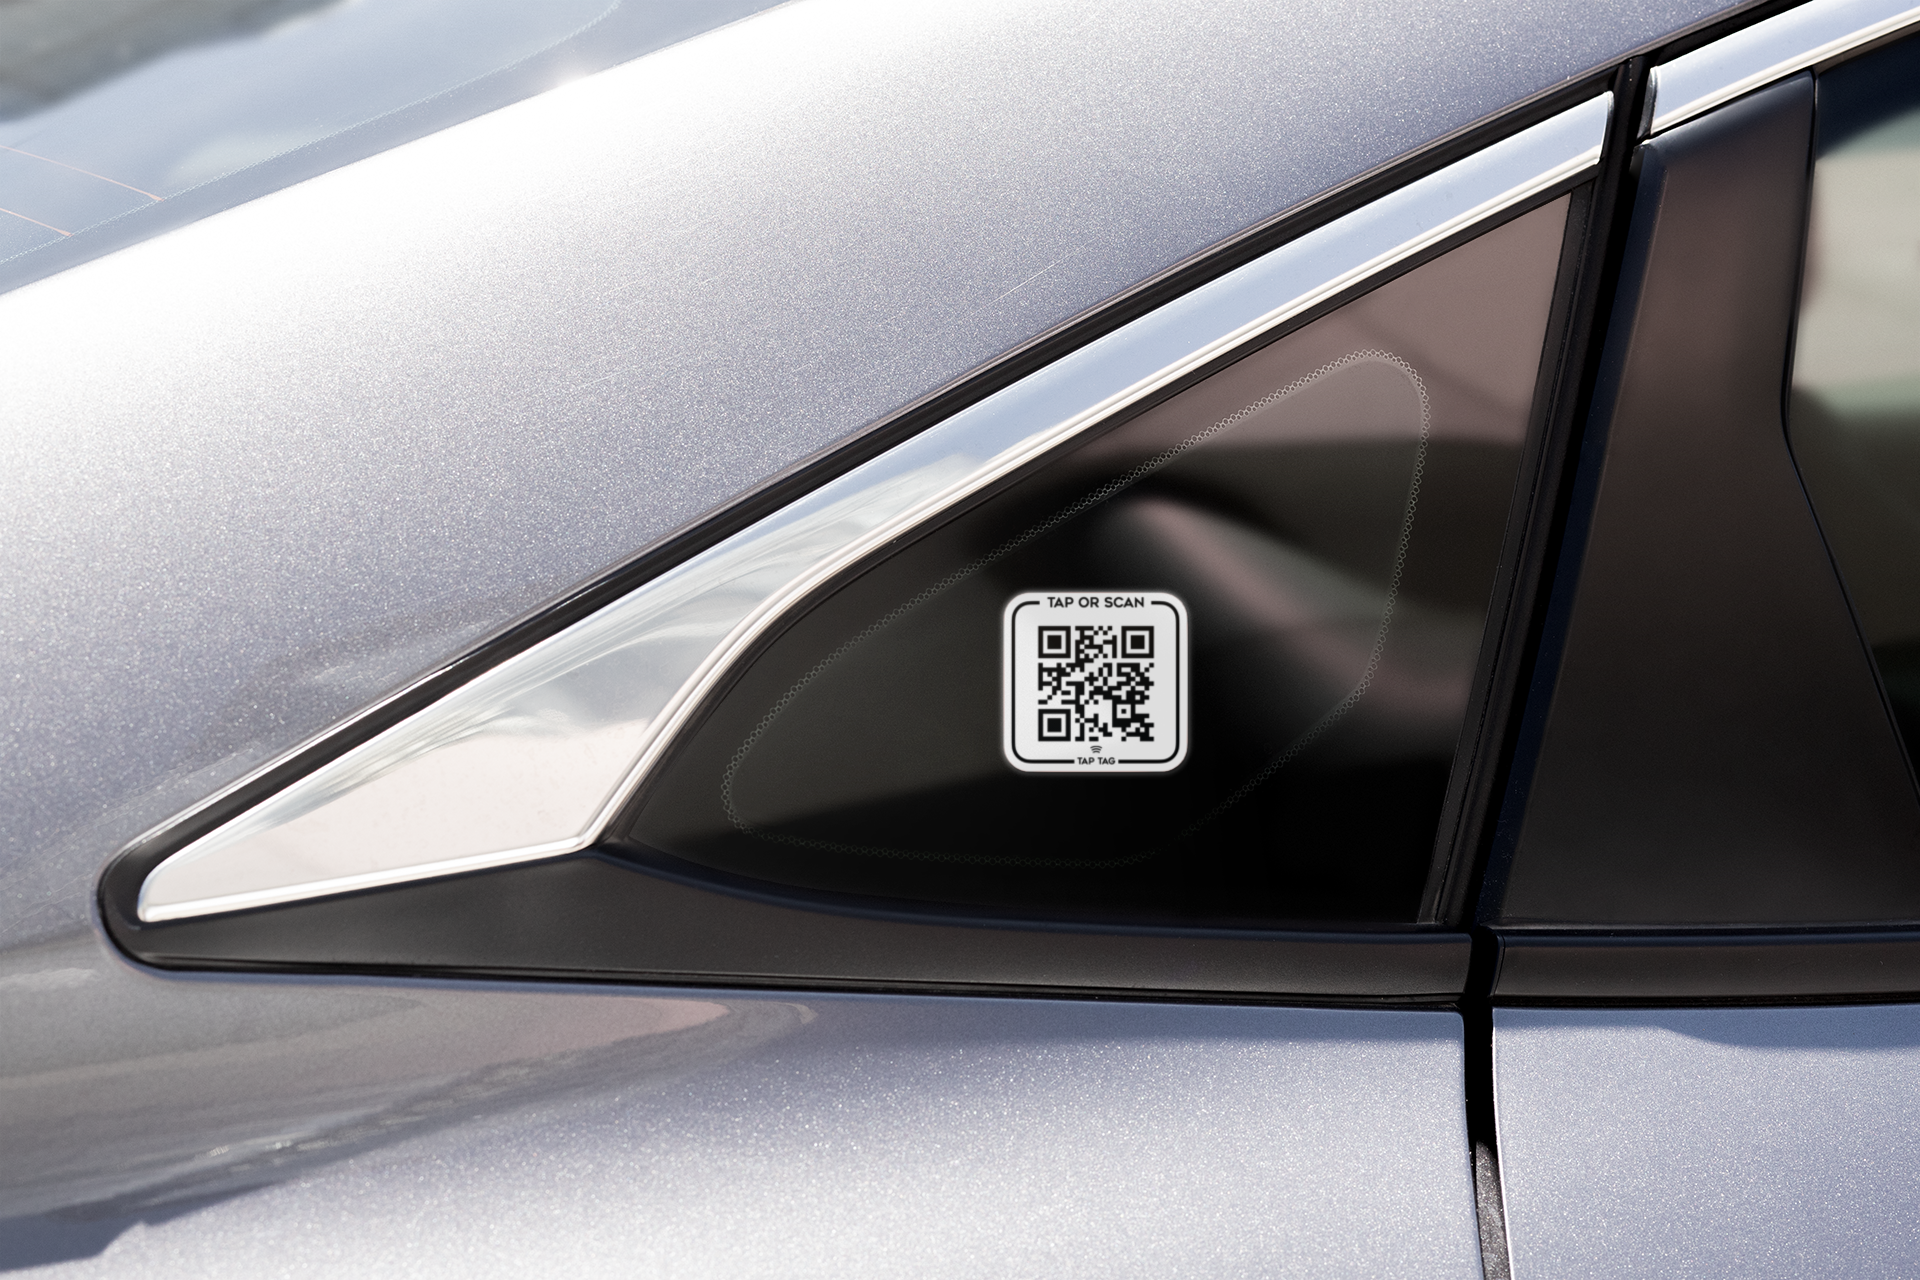 NFC QR Sticker Pack - Tap or Scan